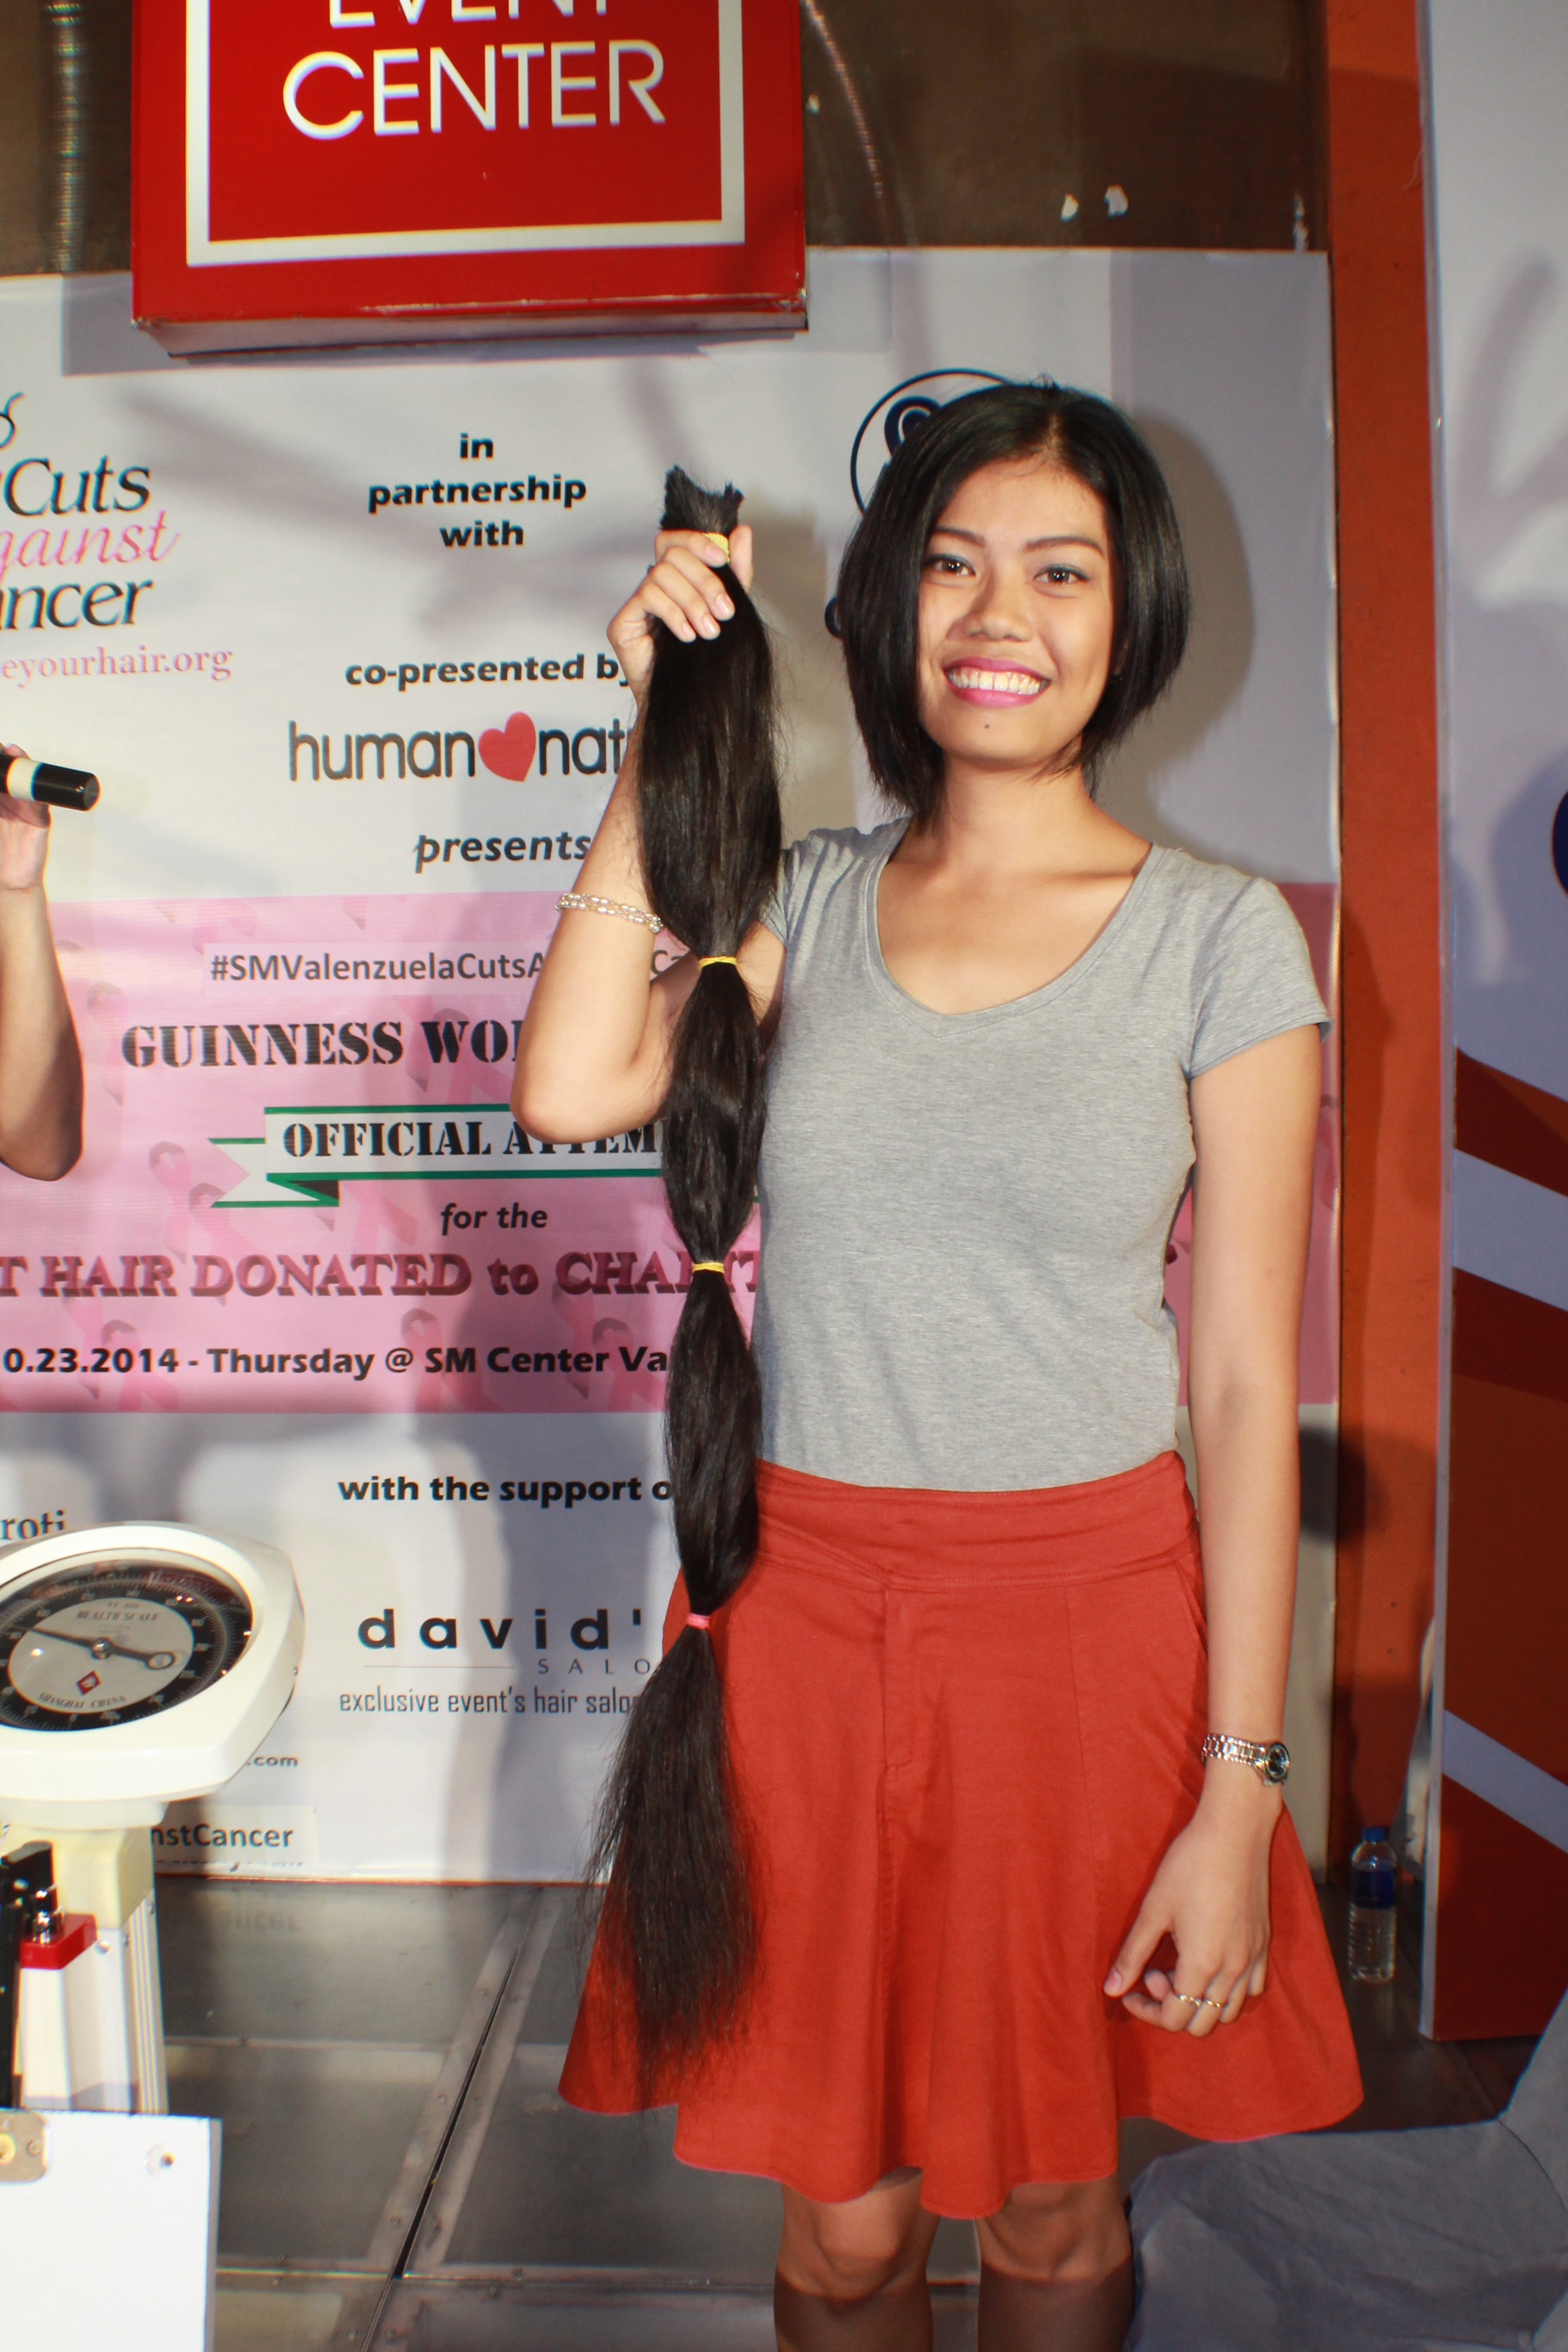 Longest Hair Donated At Cuts Against Cancer